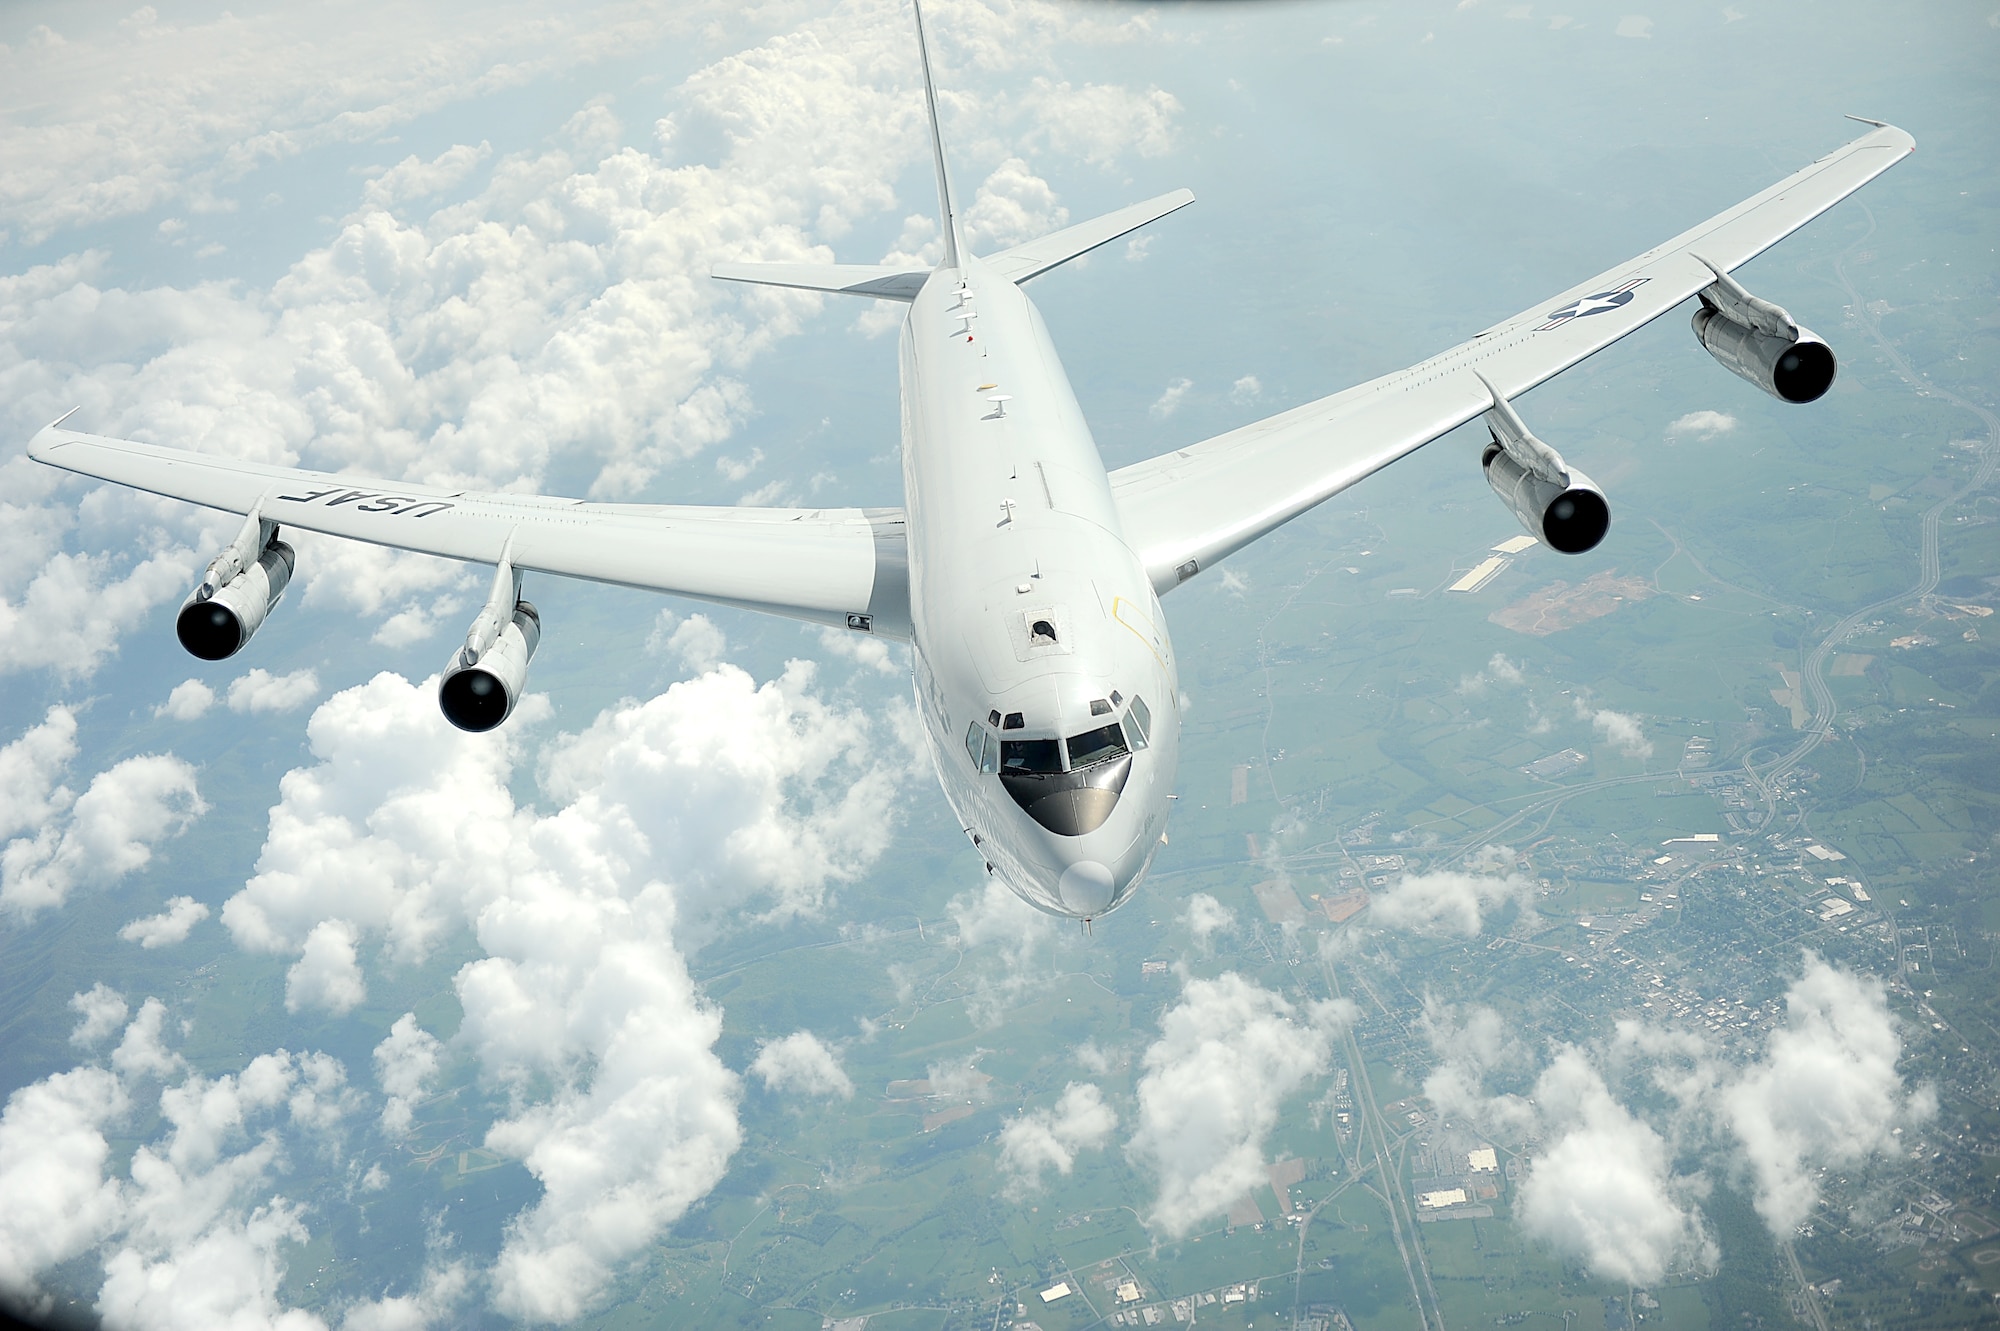 An E-8C Joint STARS from the 116th Air Control Wing, Robins Air Force Base, Ga., pulls away, May 1, 2012 after refueling from a KC-135 Stratotanker with the 459th Air Refueling Wing, Joint Base Andrews, Md. The E-8C Joint Surveillance Target Attack Radar System, or Joint STARS, is an airborne battle management, command and control, intelligence, surveillance and reconnaissance platform. Its primary mission is to provide theater ground and air commanders with ground surveillance to support attack operations and targeting that contributes to the delay, disruption and destruction of enemy forces. (U.S. Air Force photo by Master Sgt. Jeremy Lock/Released)


